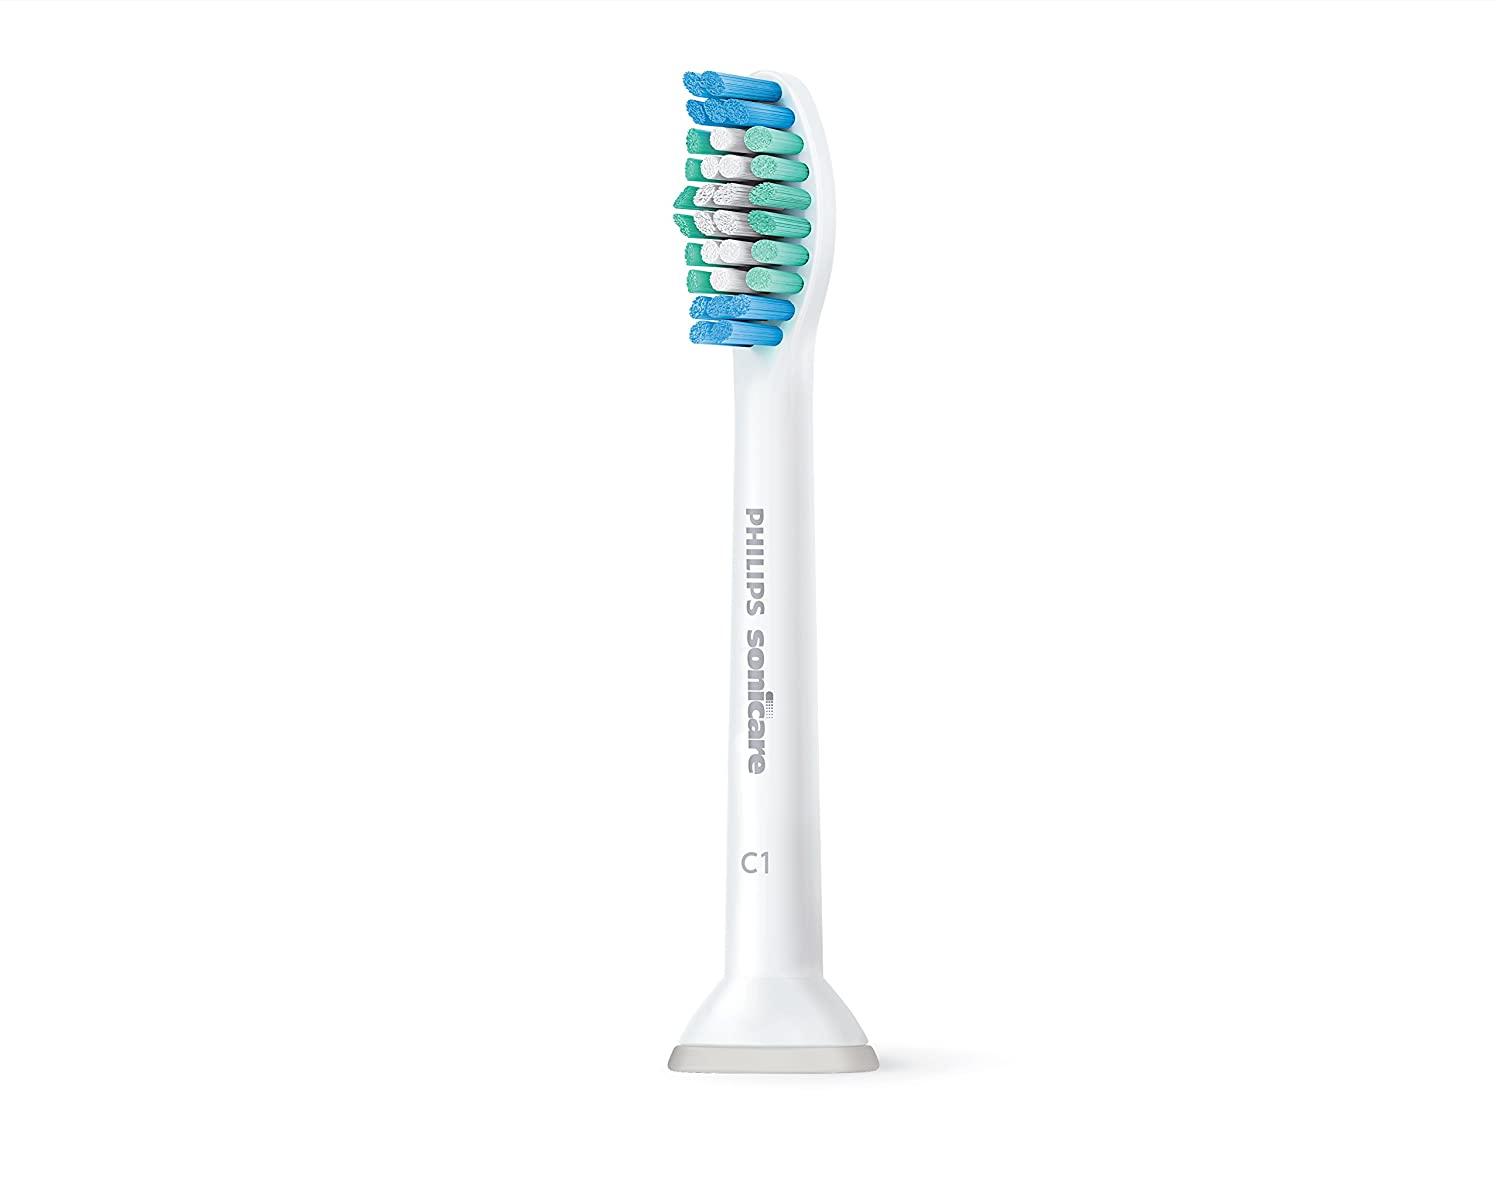 Philips Sonicare 1100 Power Toothbrush, Rechargeable Electric Toothbrush,  White Grey HX3641/02 New 1100